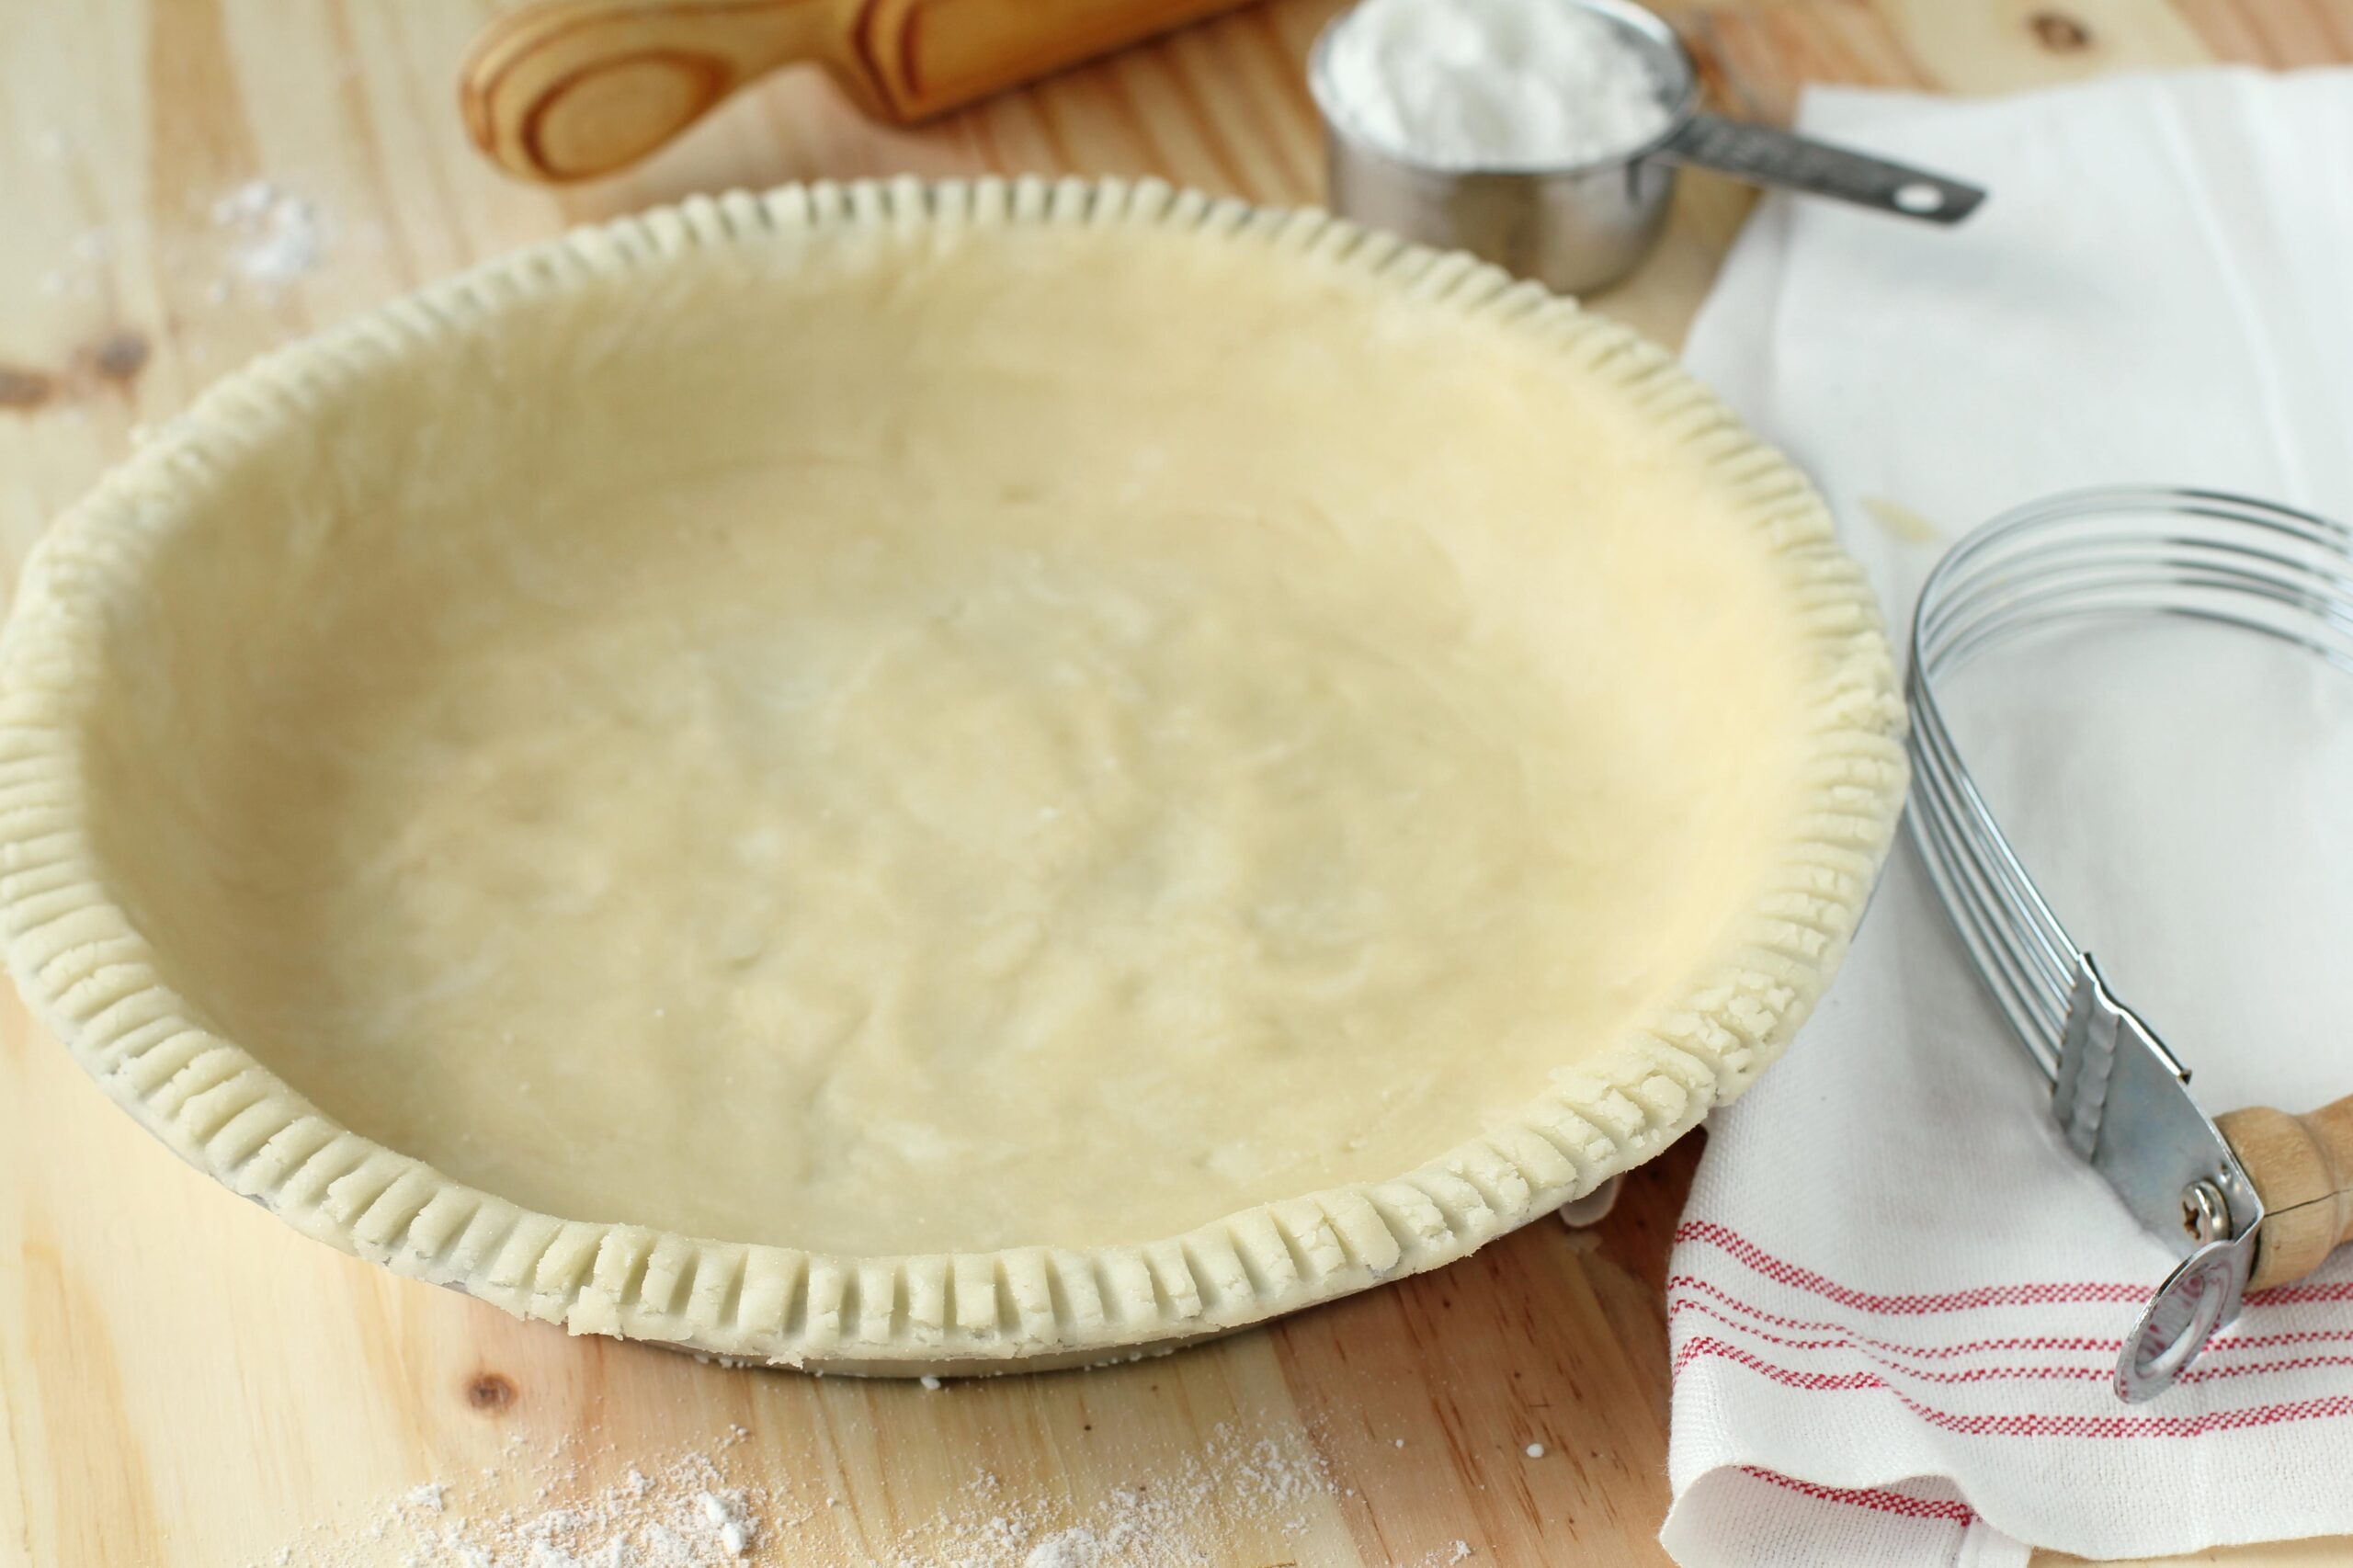  Impress your family and guests with a gluten-free pie crust that tastes amazing